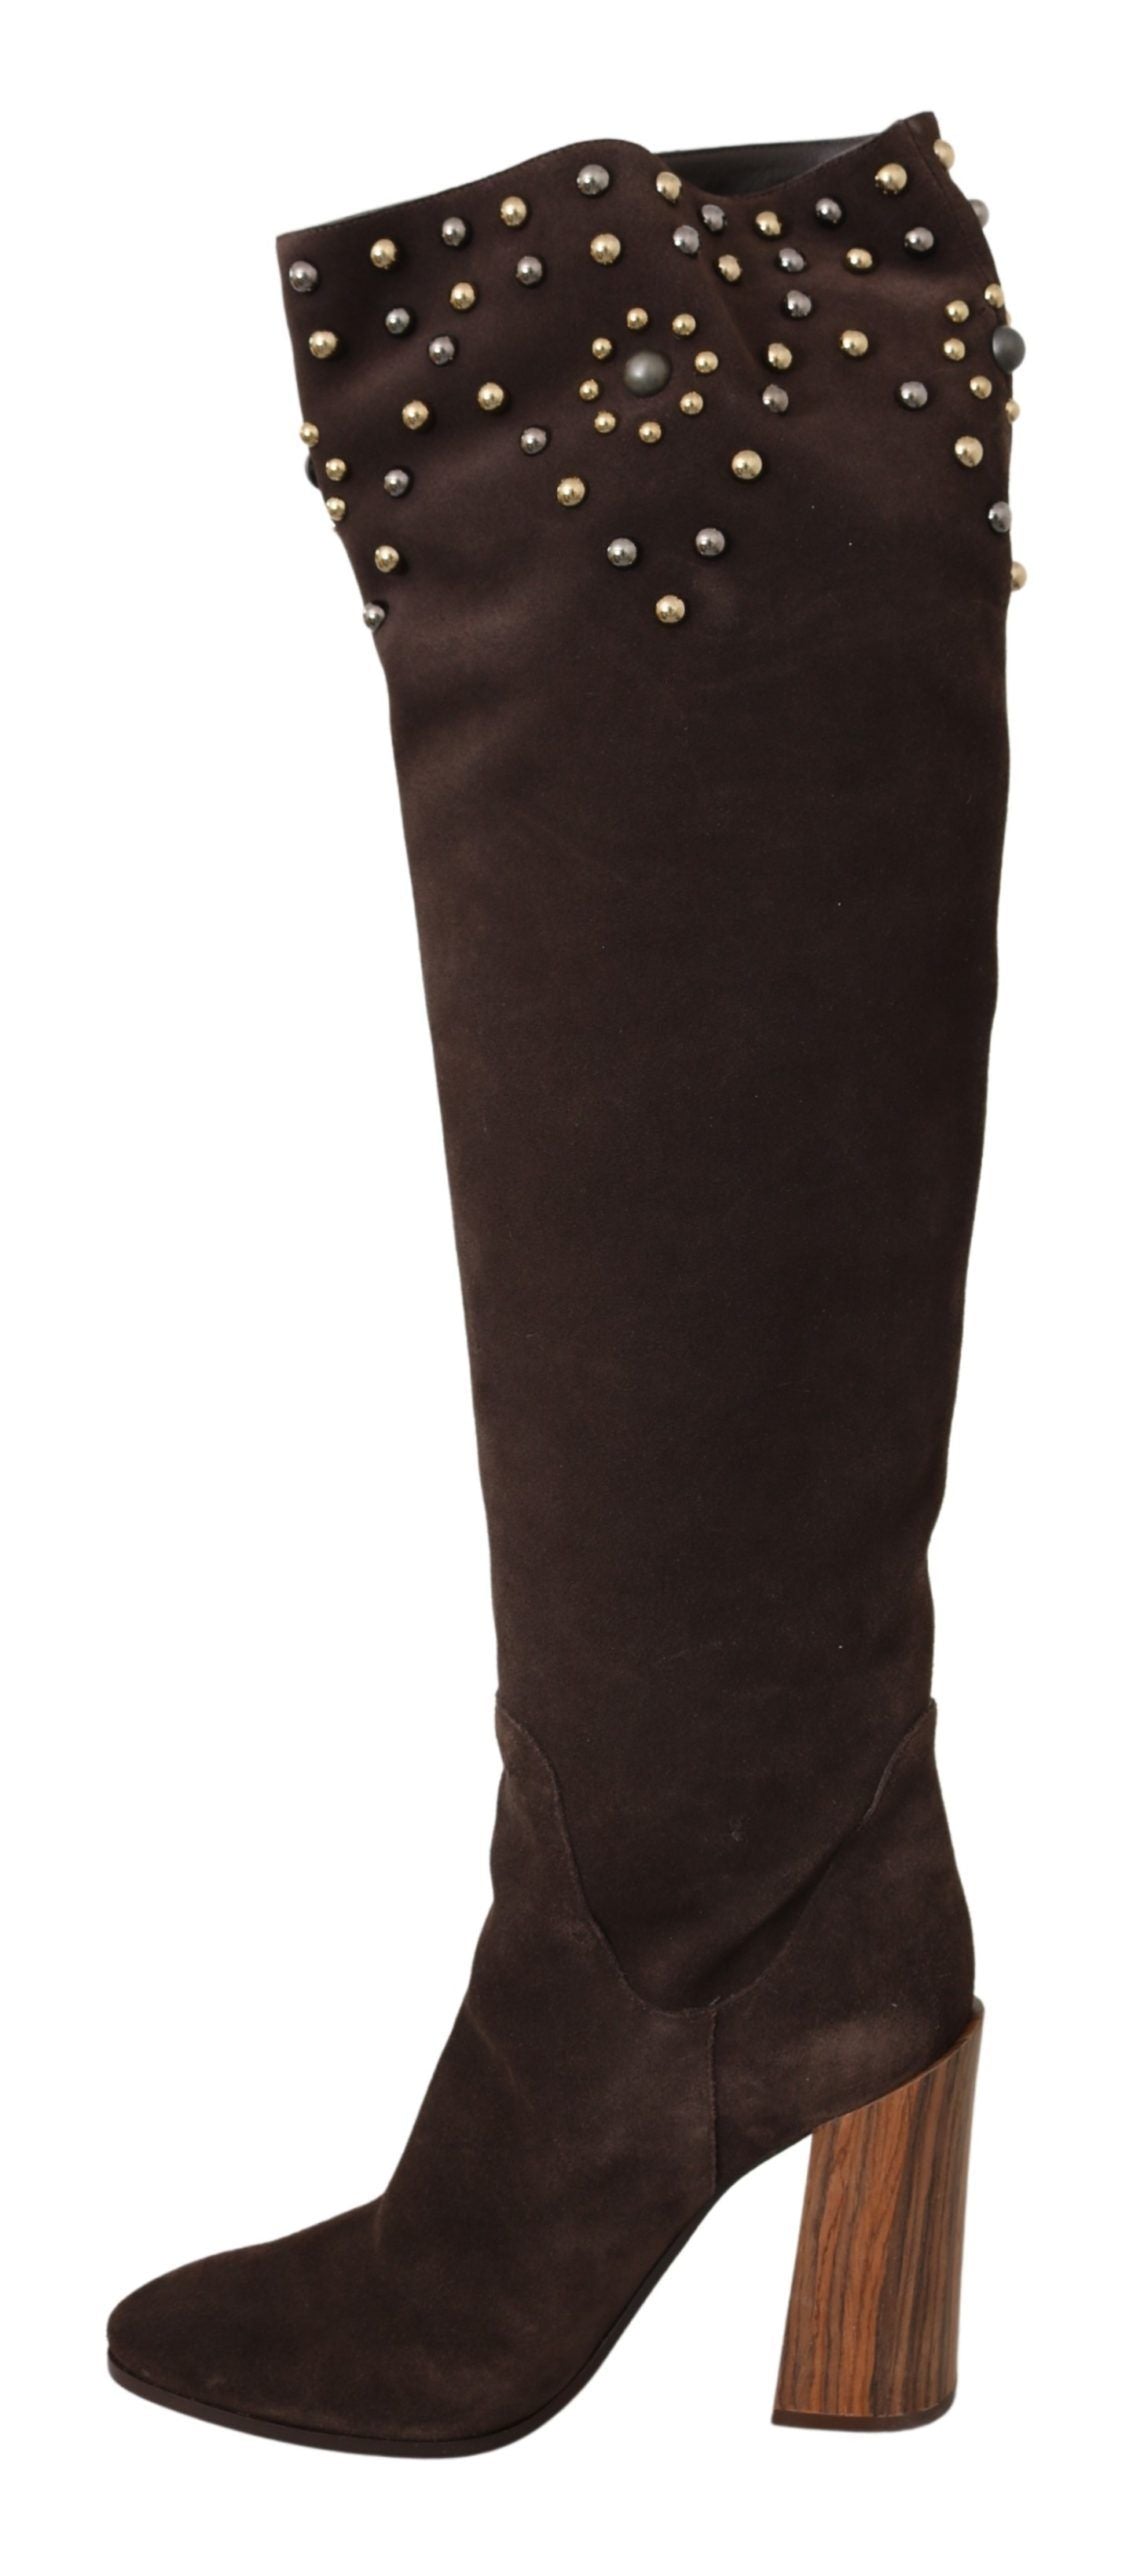 Brown Suede Studded Knee High Shoes Boots - Designed by Dolce & Gabbana Available to Buy at a Discounted Price on Moon Behind The Hill Online Designer Discount Store